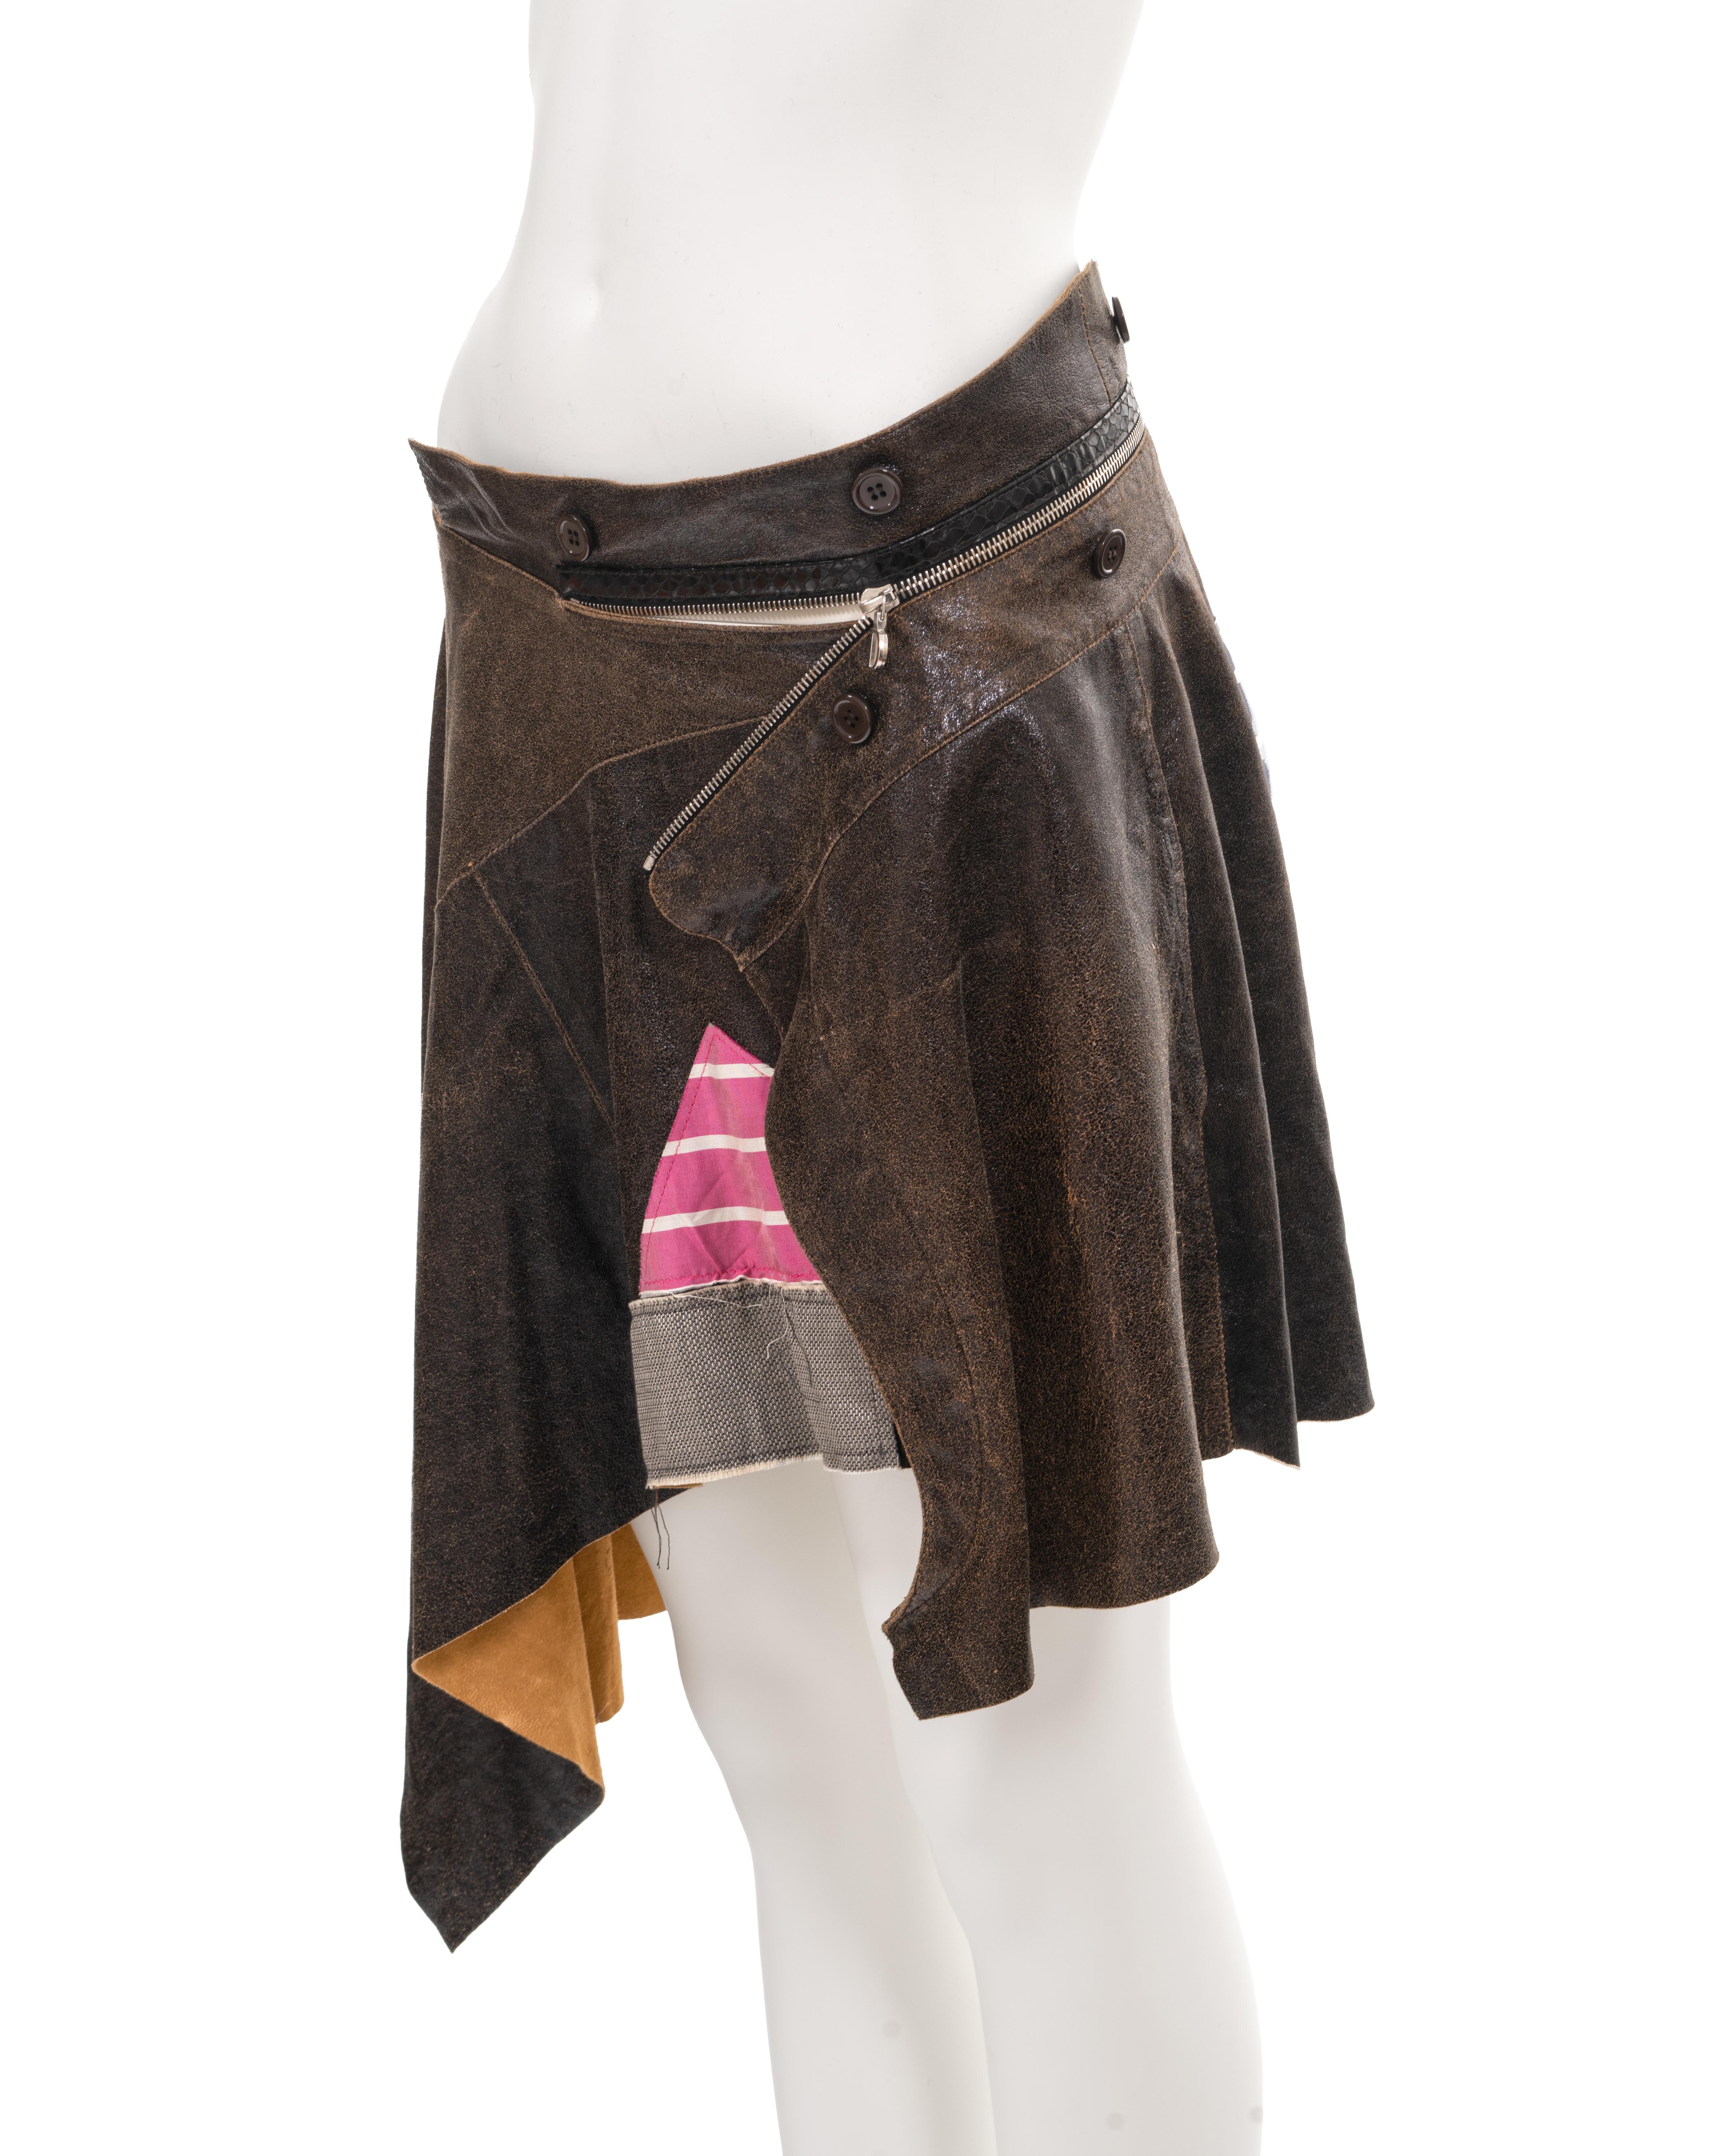 Christian Dior by John Galliano deconstructed brown leather wrap skirt, ss 2001 For Sale 3